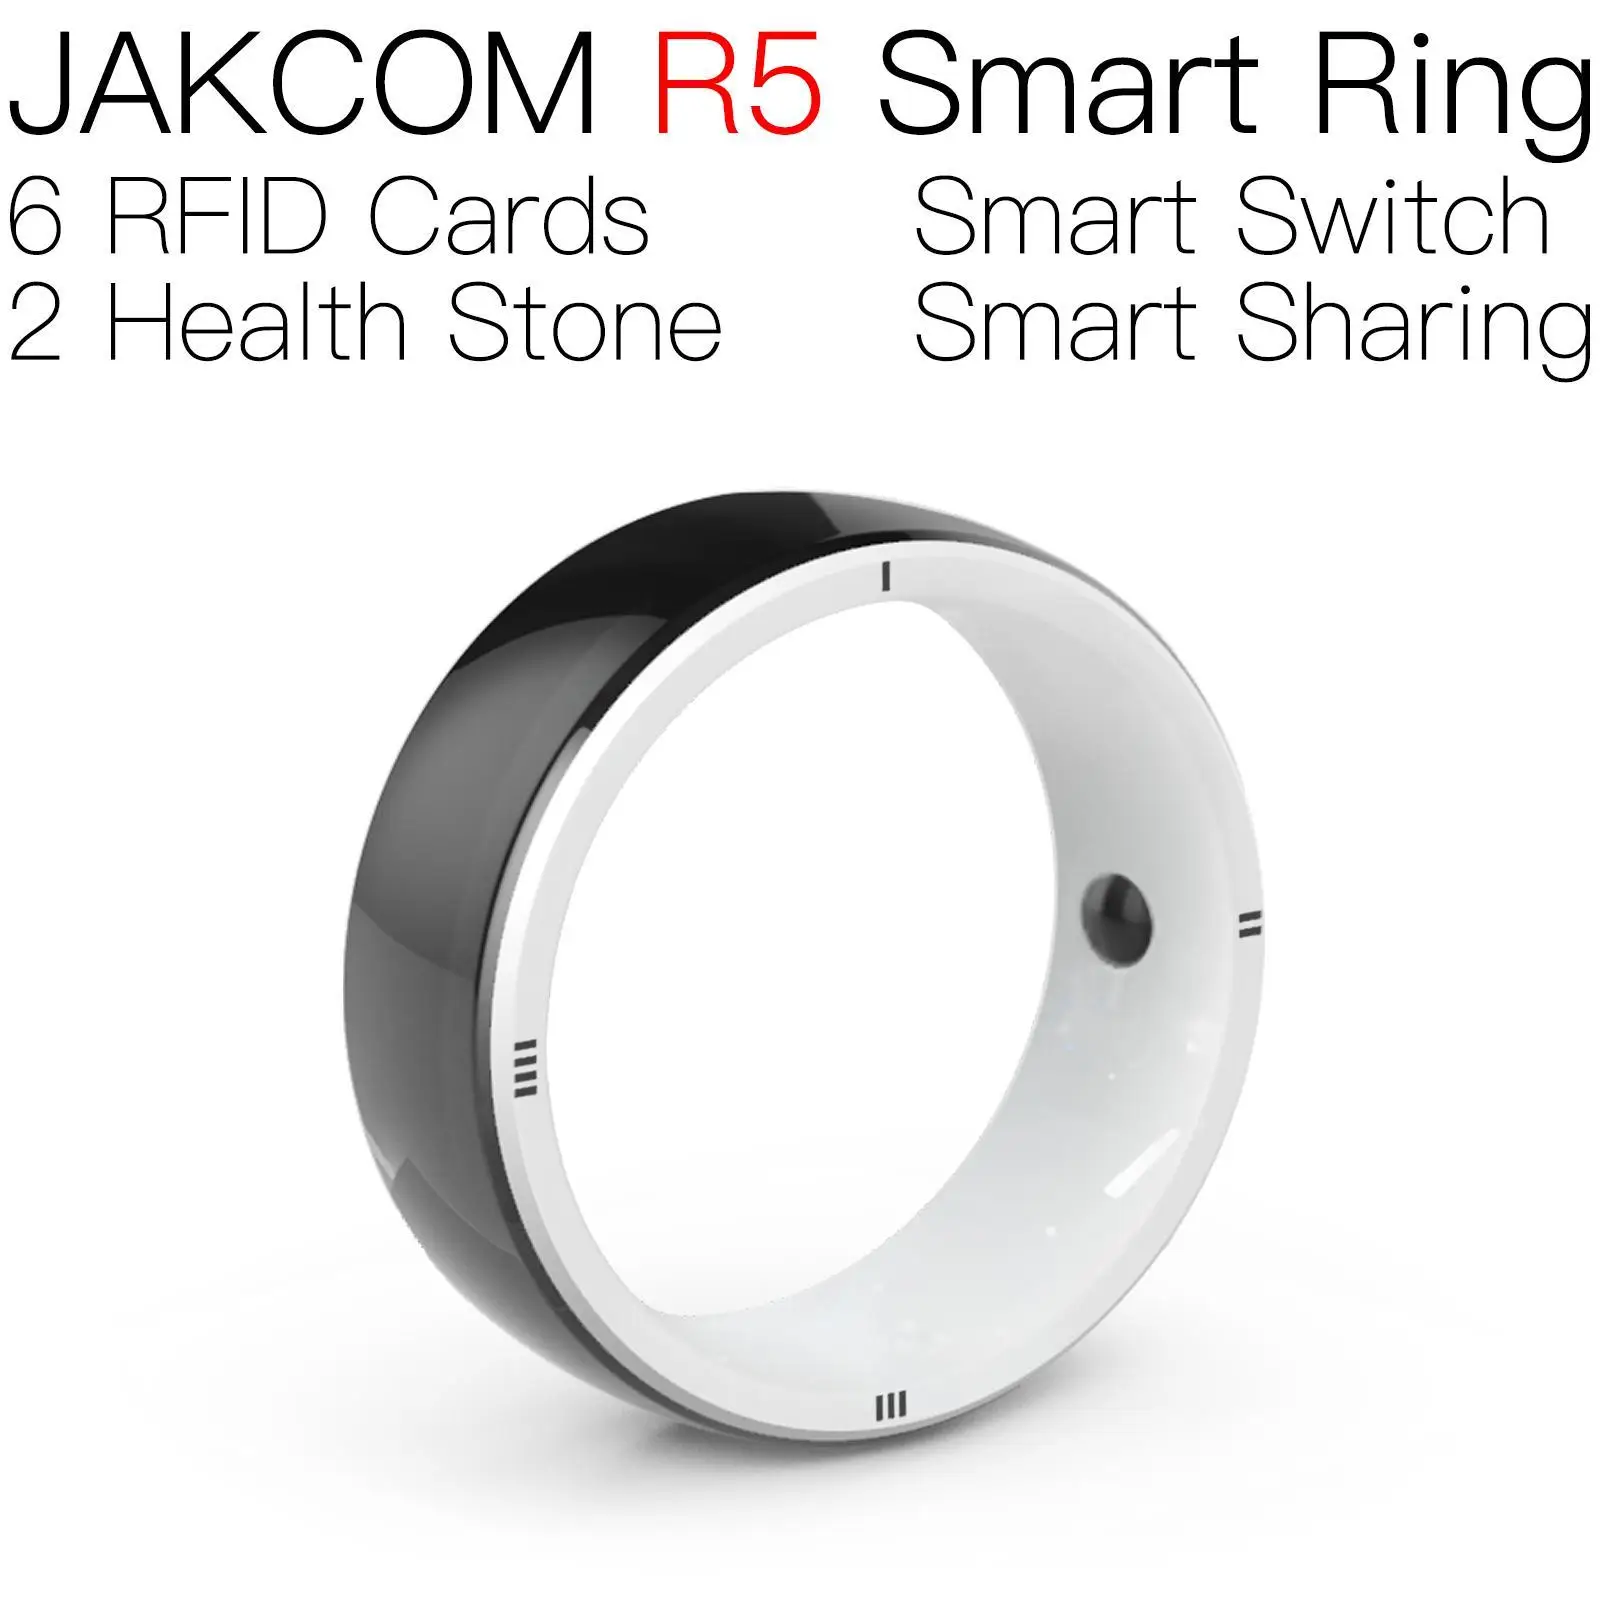 

JAKCOM R5 Smart Ring Best gift with tag iso14443a rings for dove rfid copying key cqse keyless 650 uhf mhz 26 bit iso 6b